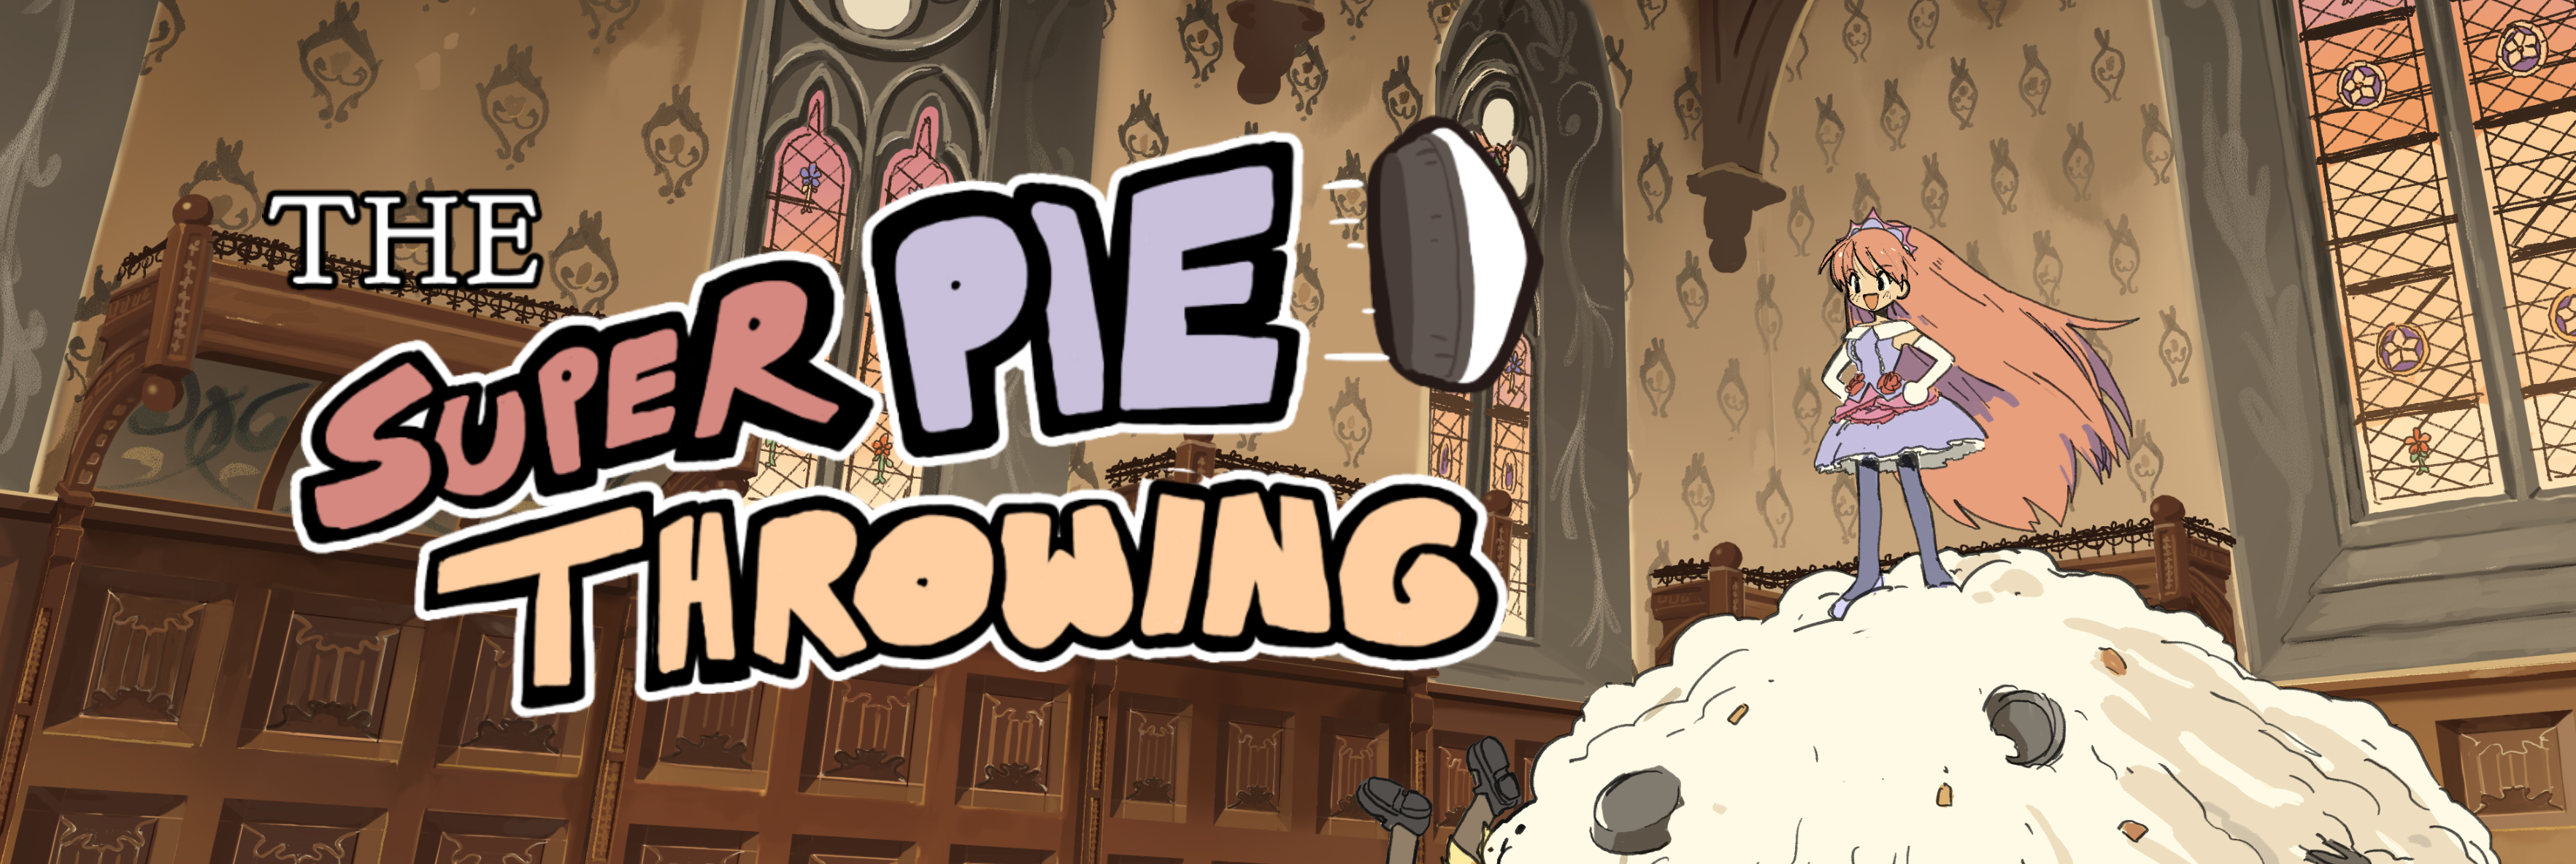 The Super Pie Throwing